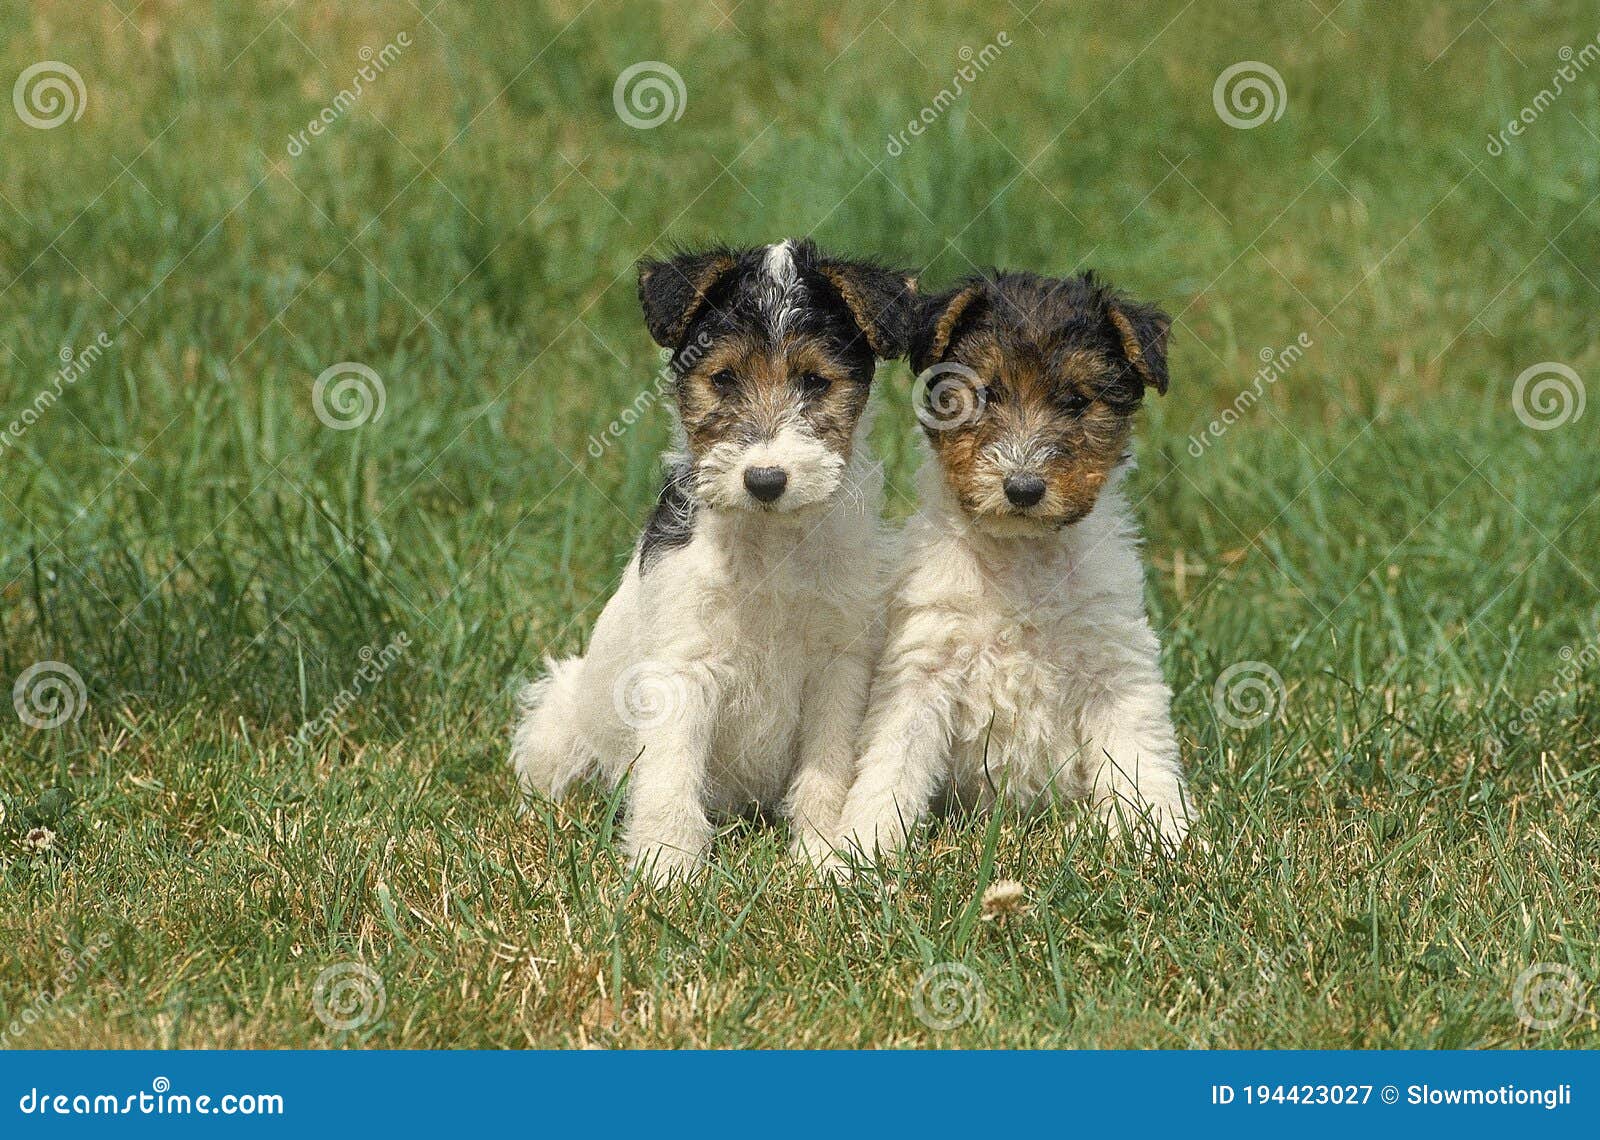 WIRE-HAIRED FOX TERRIER DOG, PUPPIES SITTING on GRASS Stock Image - Image  of view, wirehaired: 194423027